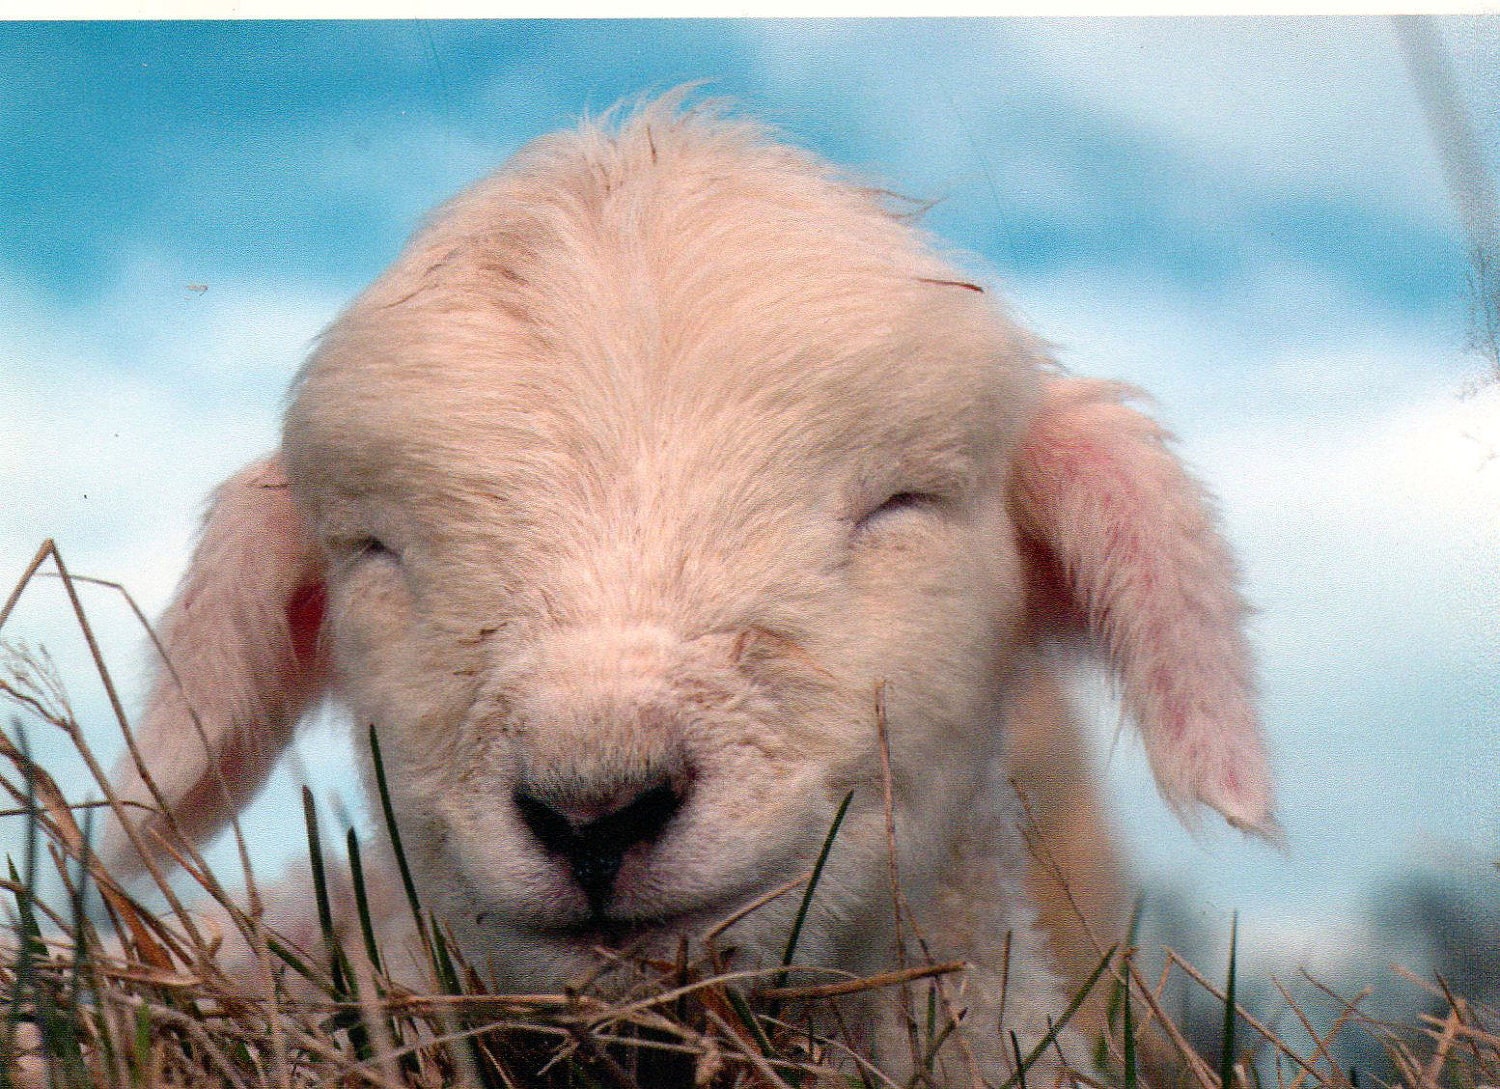 Lamb, Sheep, Great nursery decor or baby shower gift...SMILE, New born lamb, color photograph taken in New Zealand